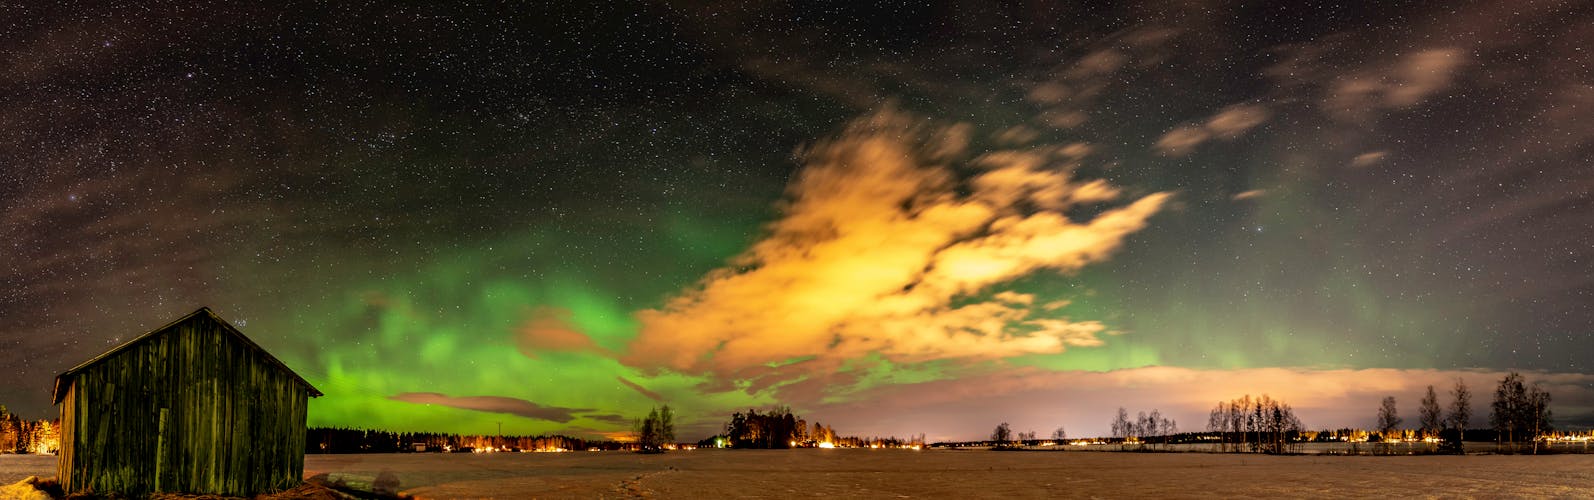 Panorama of green lights Aurora and stars shine over abandoned shed standing alone in the field, Umea city, Sweden.